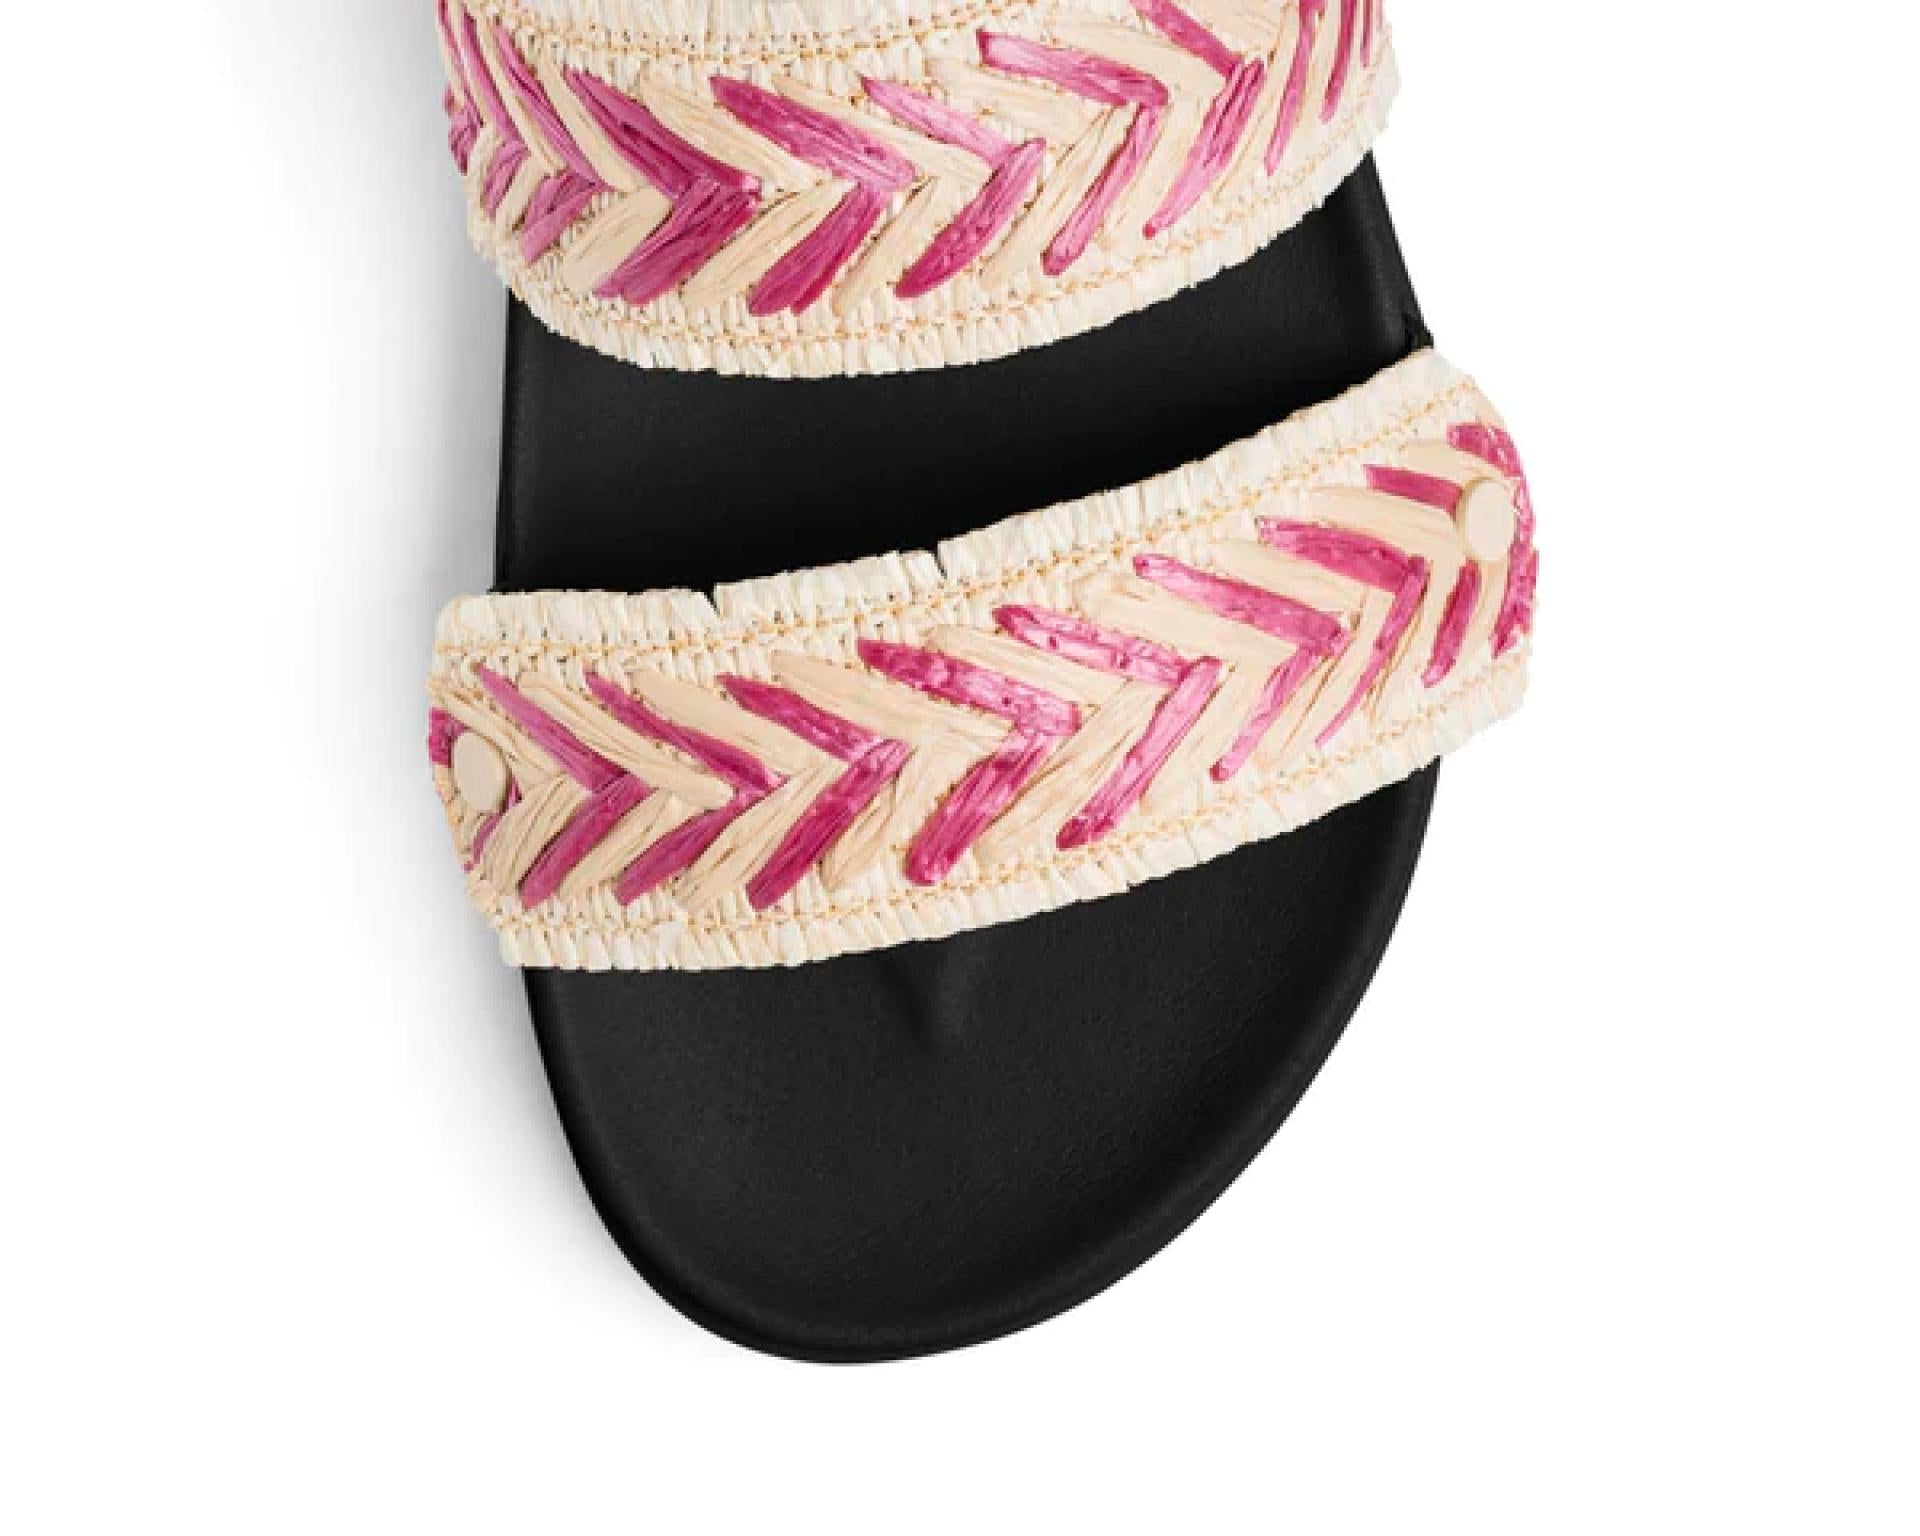 Hey Marly Accessoire für Double Patch Sandale PS2 - Variante: Beach Lines - Fuchsia